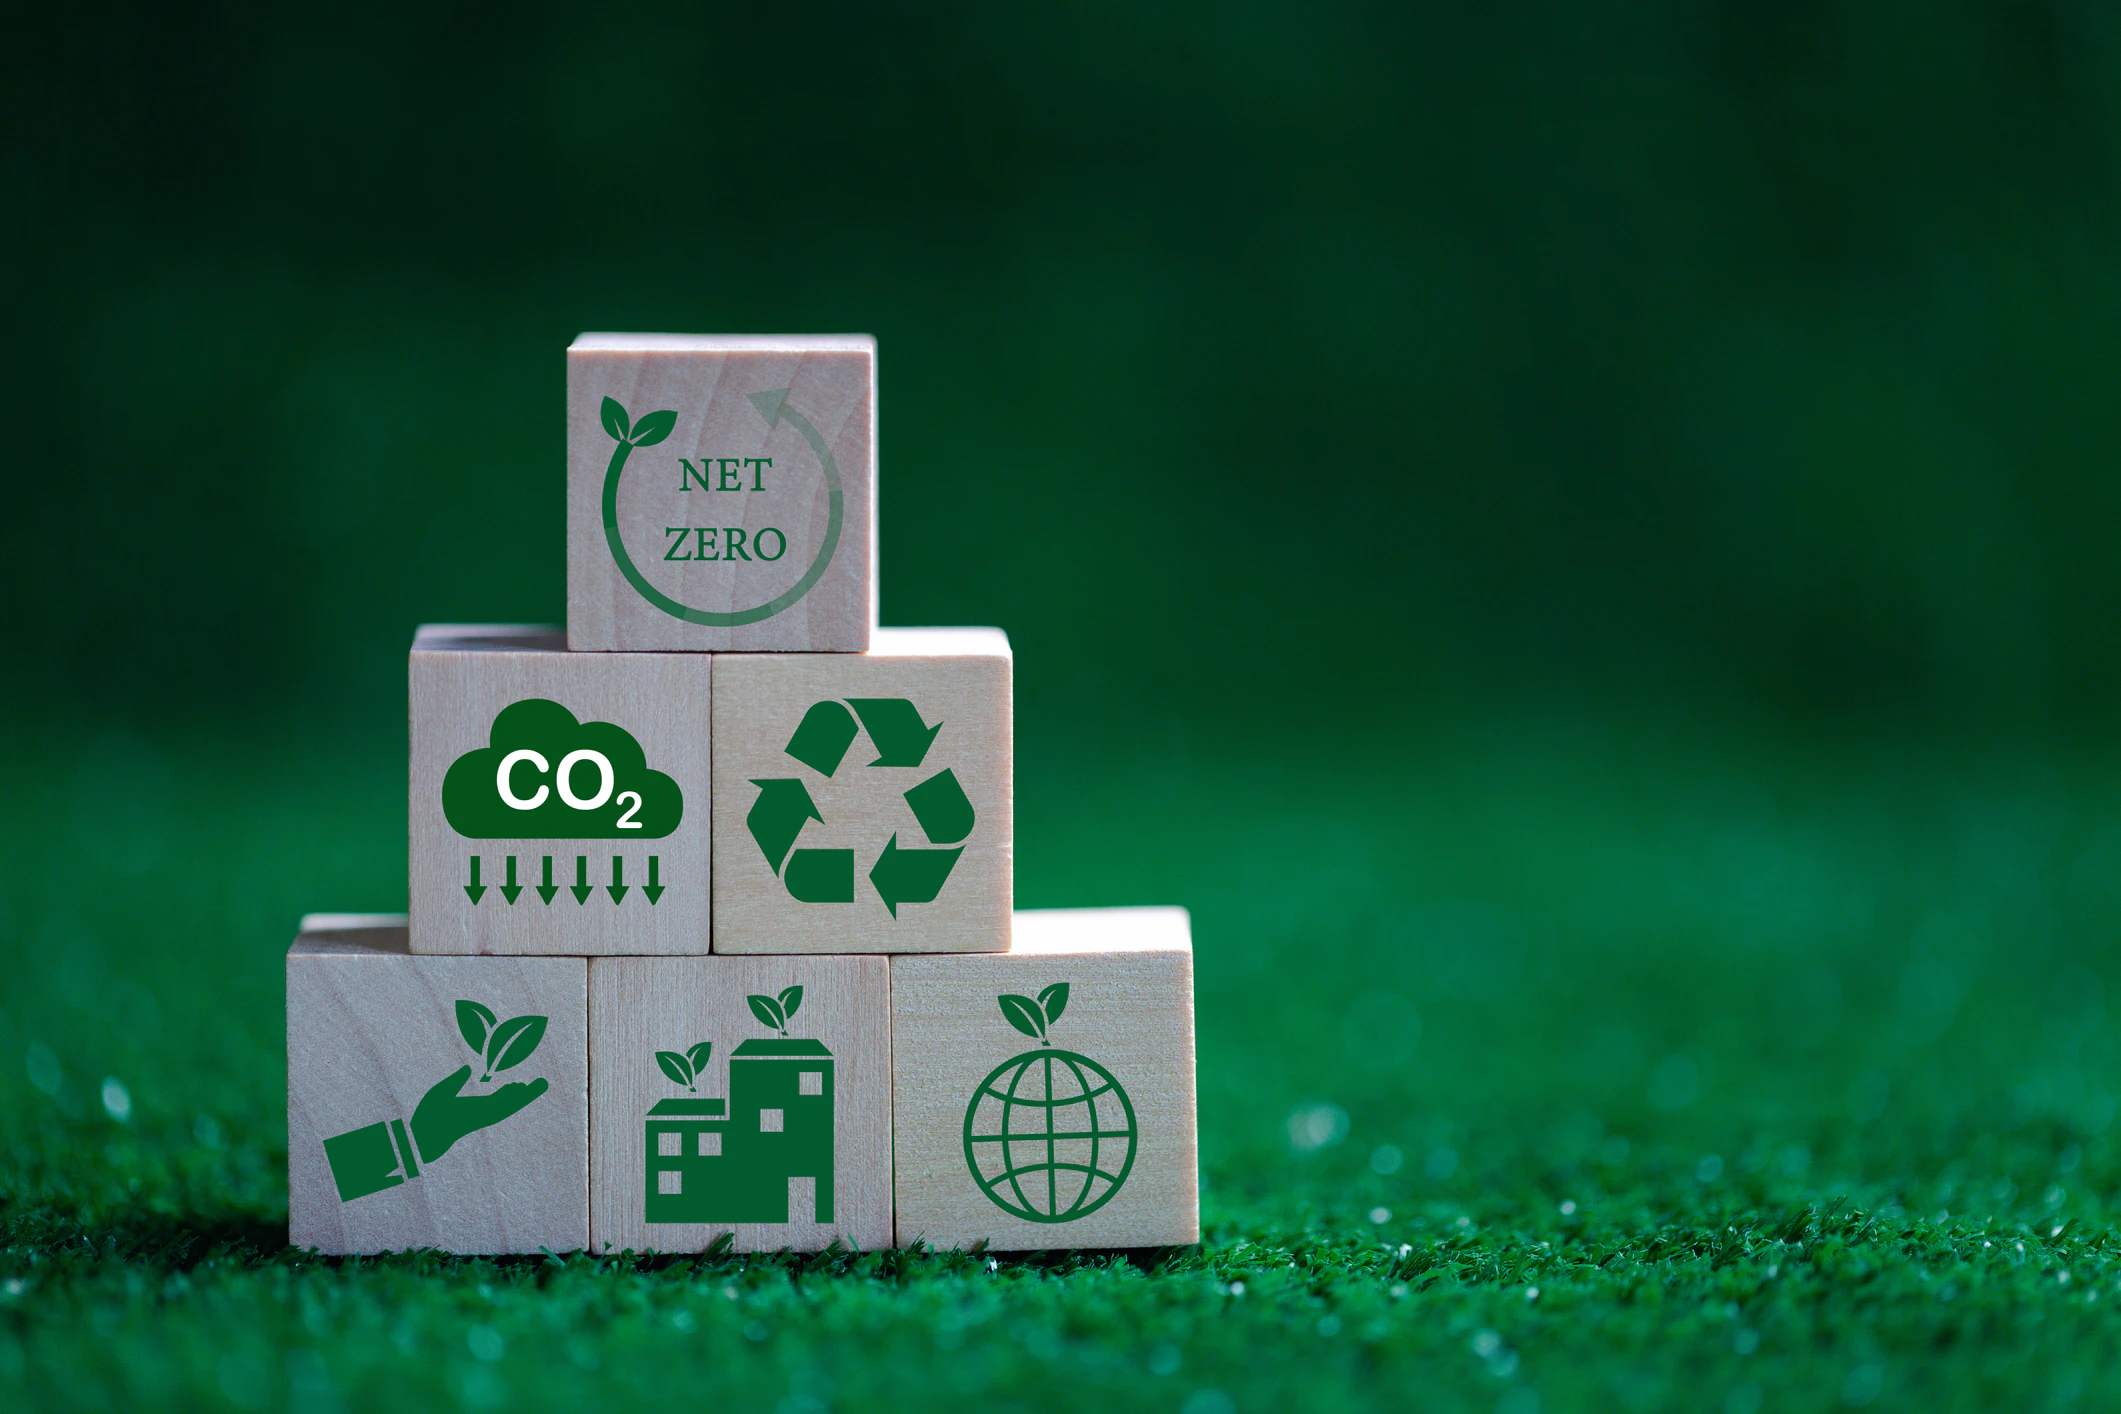 Innovative CPG Packaging Trends to Support Sustainability: What Leading CPG Companies are Doing